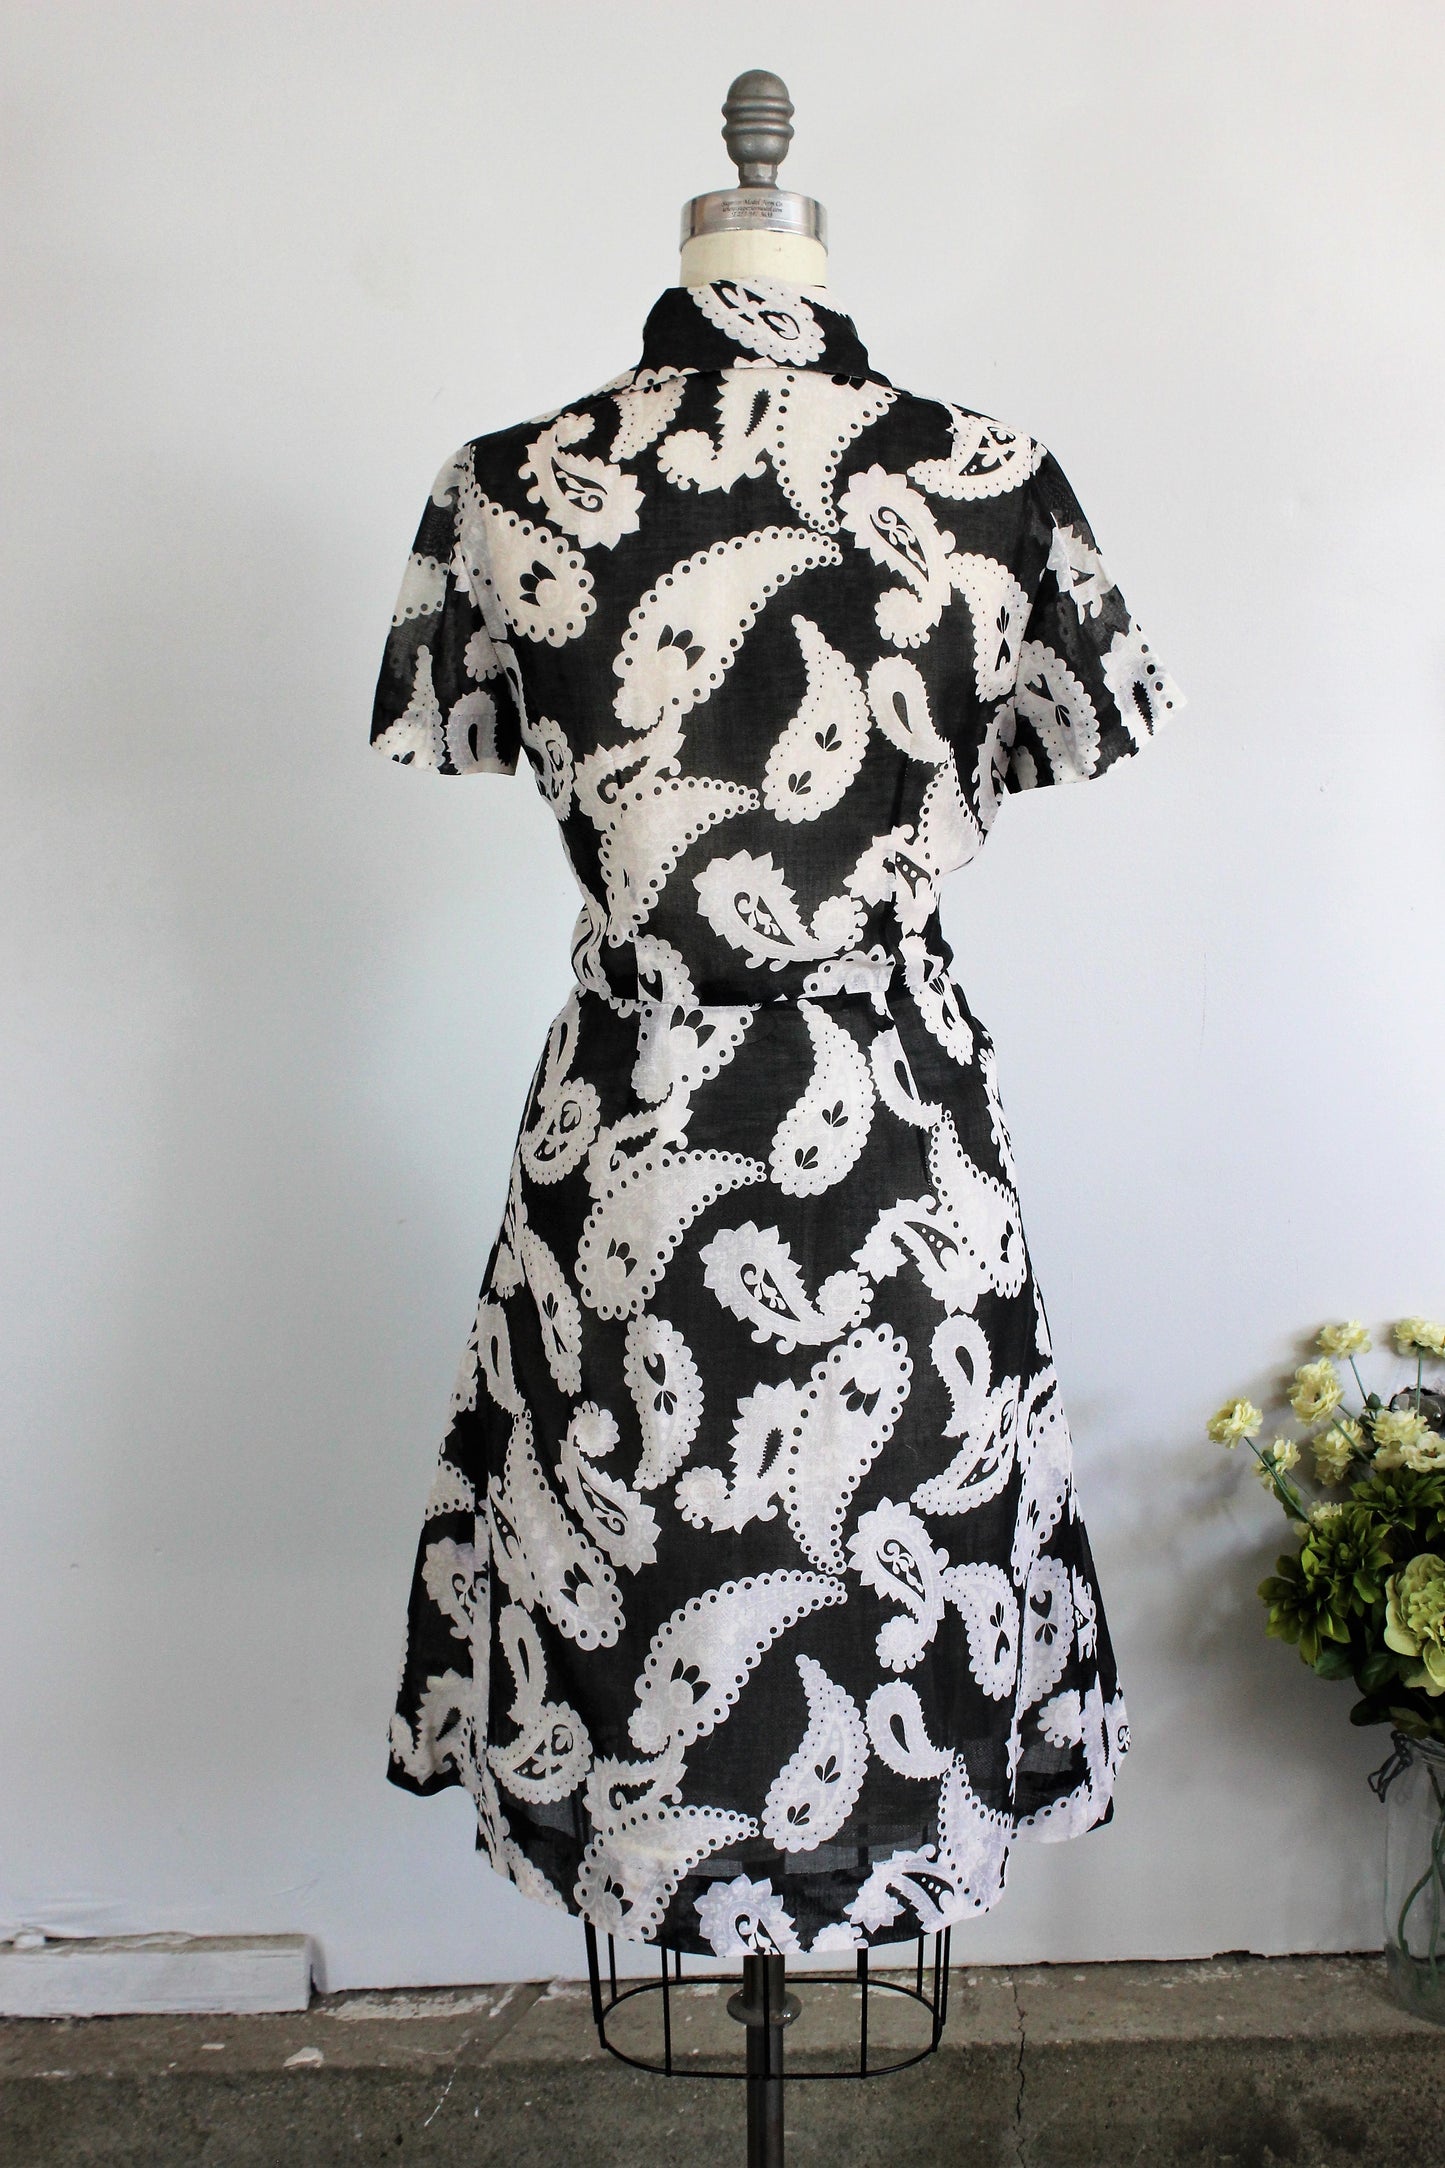 Vintage 1970s Does 1950s Shirtwaist Dress In A Black And White Paisley ...